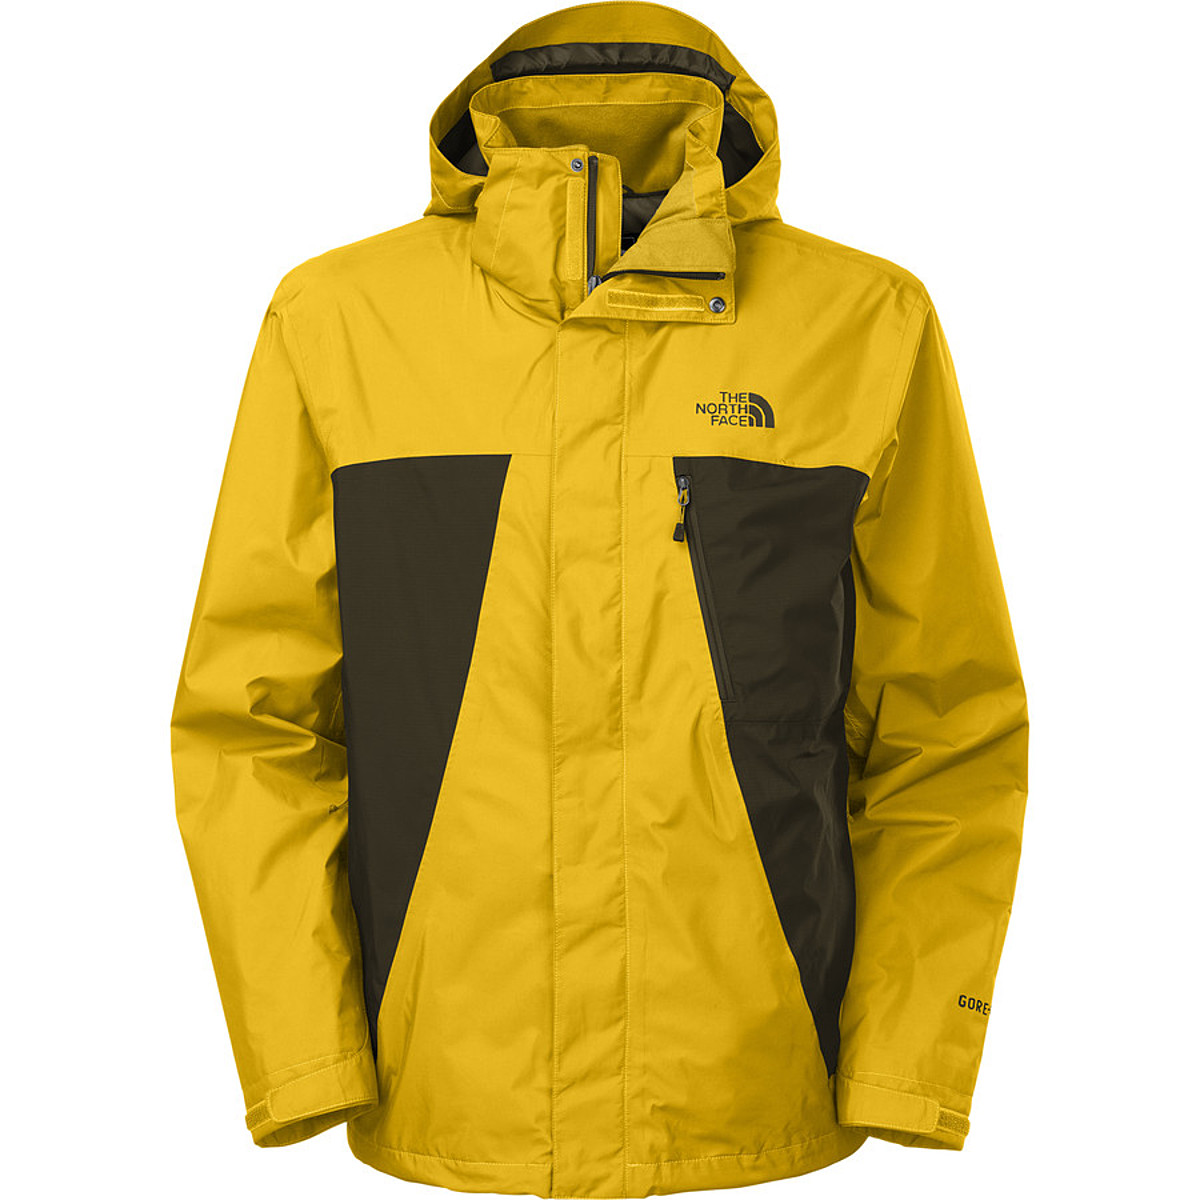 The North Face Mountain Light Jacket 